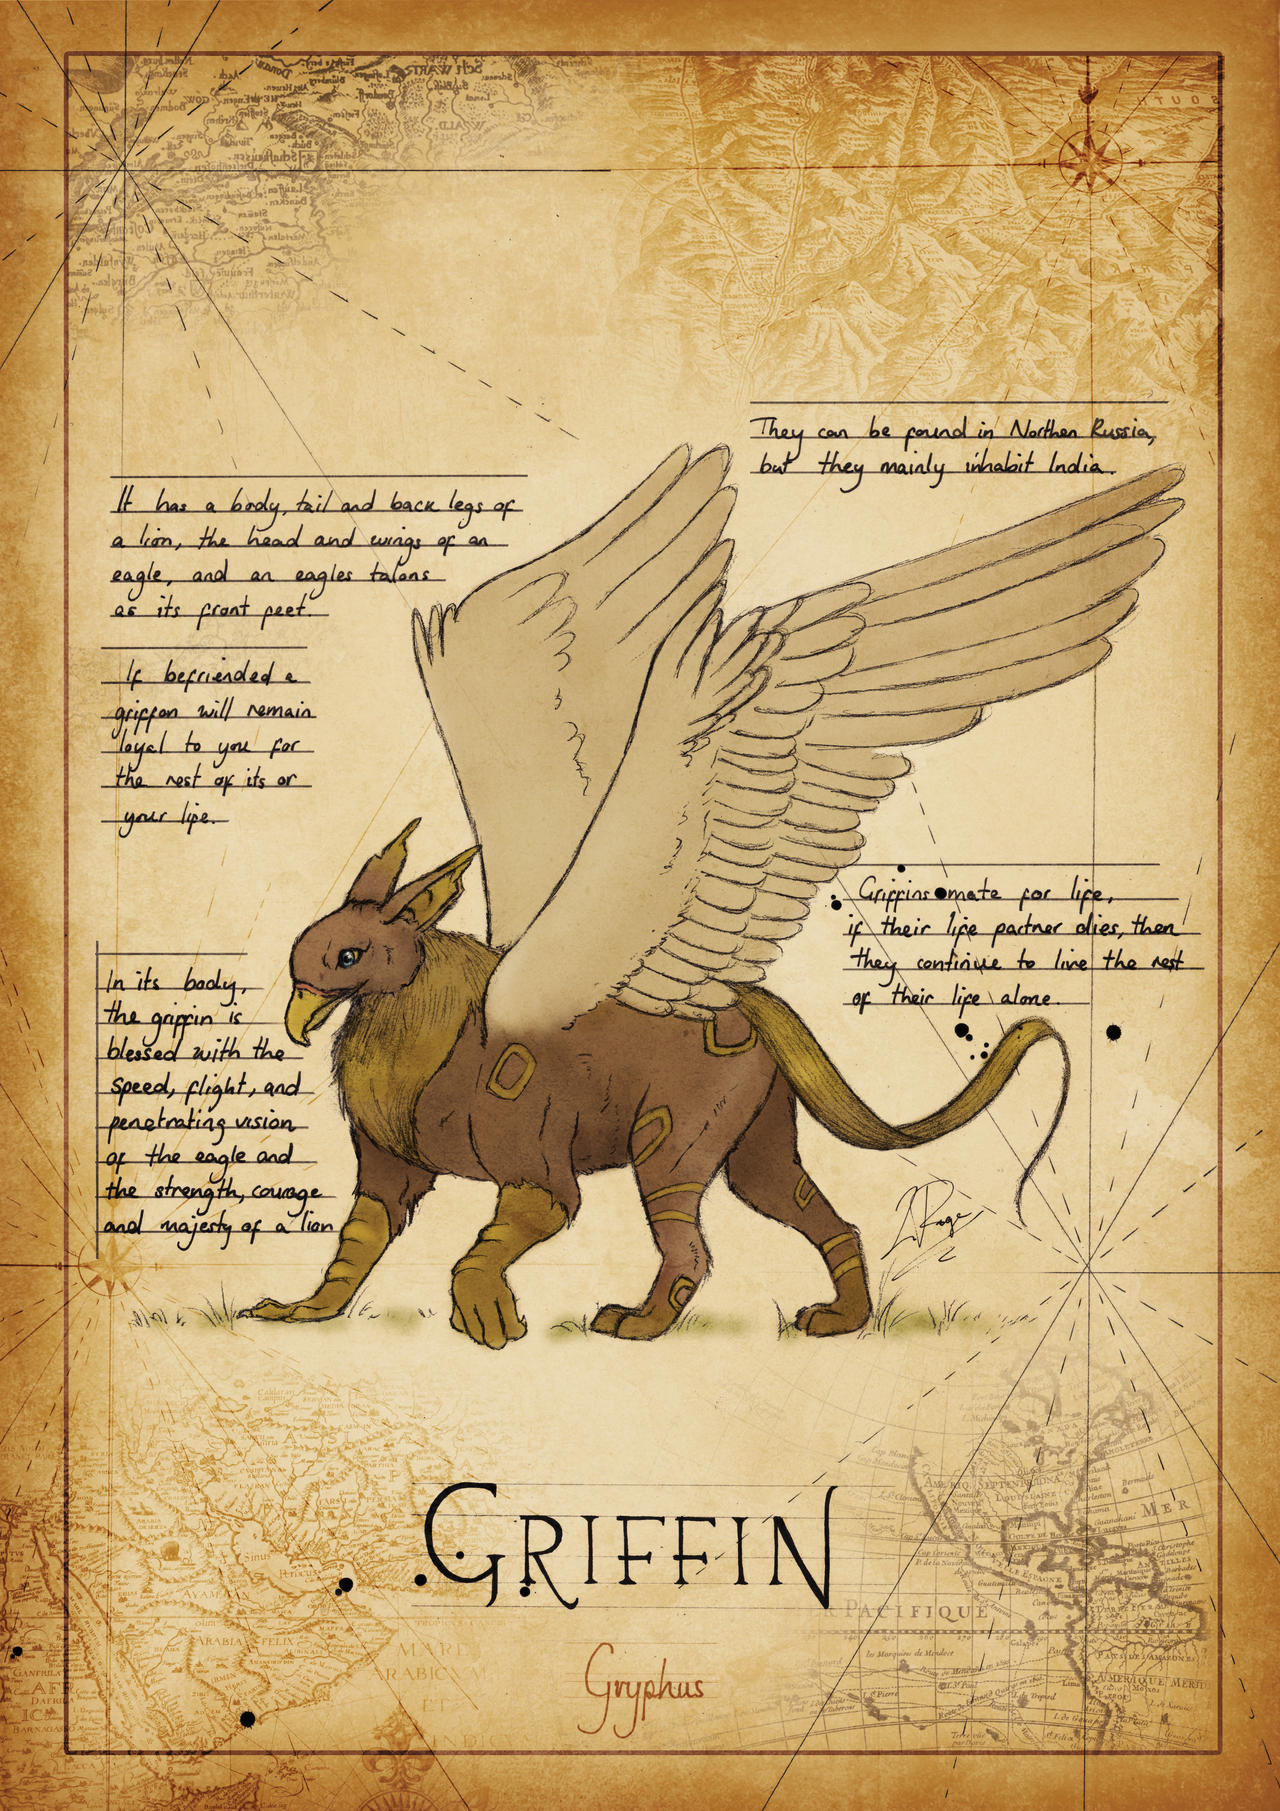 The Griffin by LaurenceAndrewPage on DeviantArt